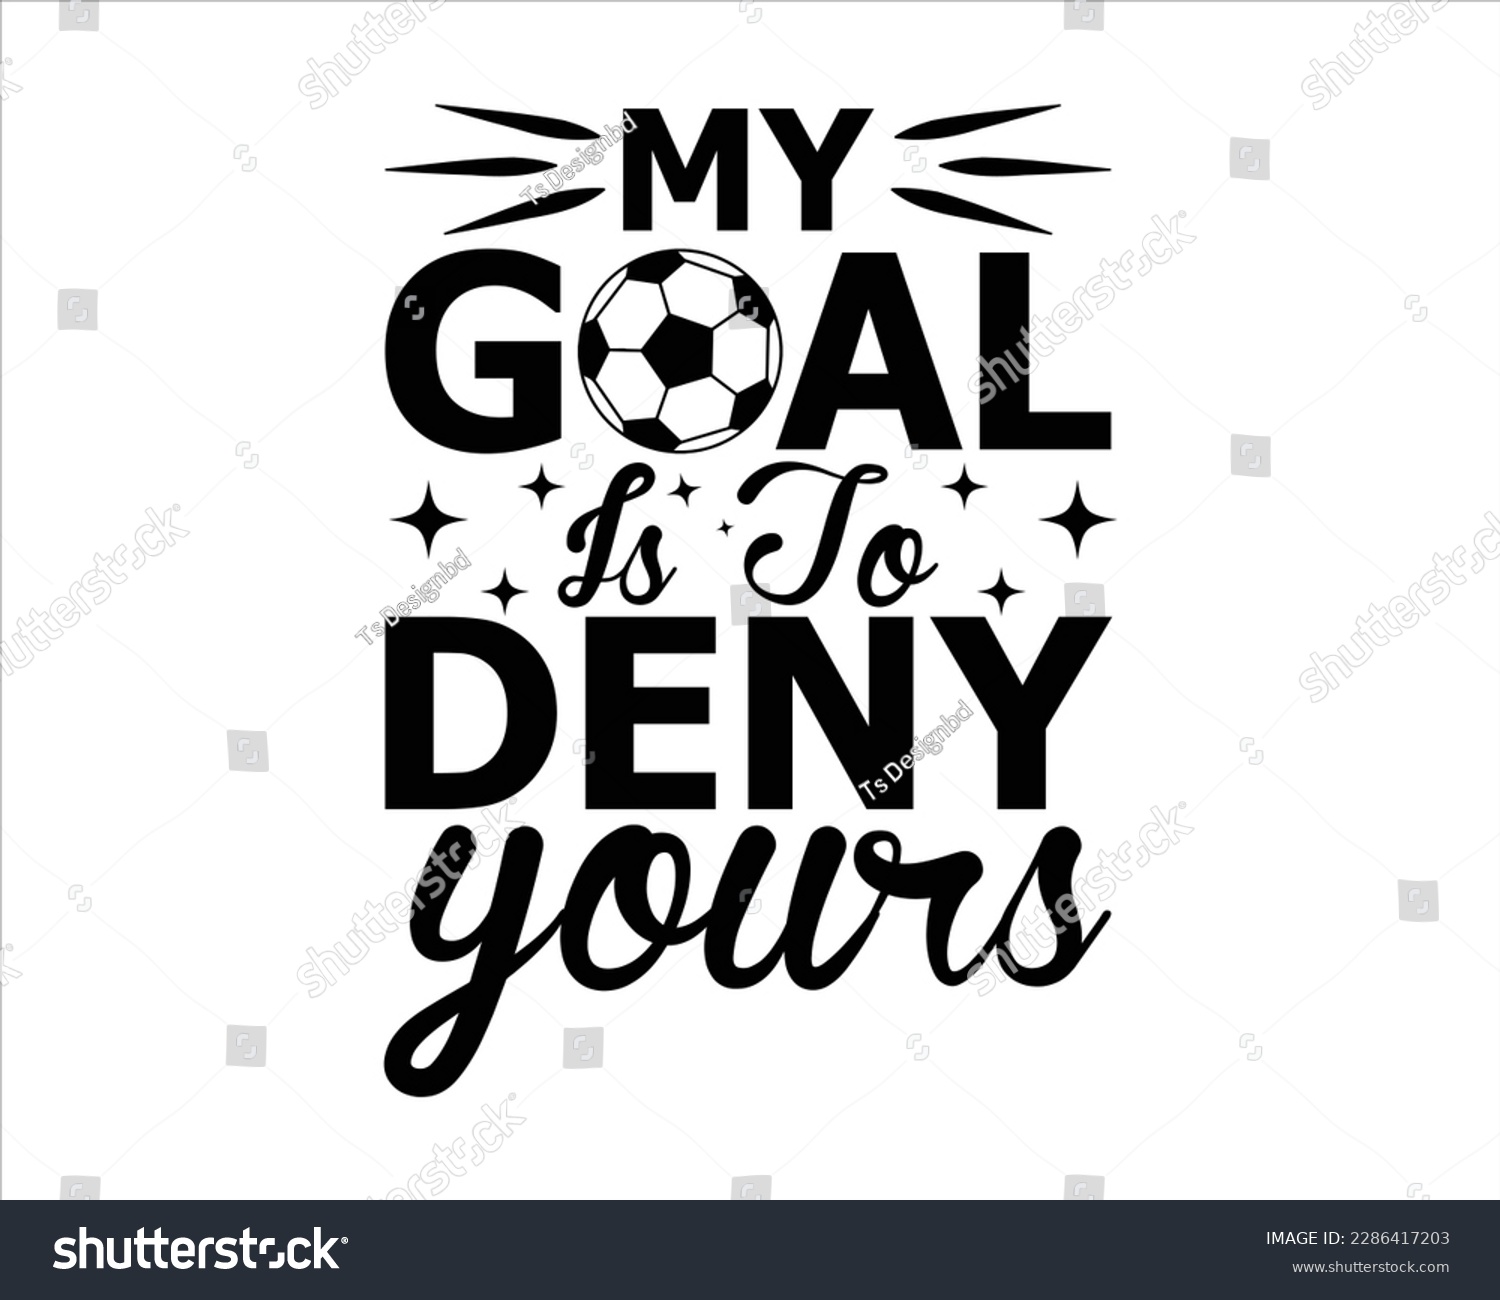 SVG of My Goal Is to Deny Yours  Svg Design,Soccer Svg,Soccer Mom Life Svg, Soccer Svg Designs,Proud Soccer Svg,Soccer Quote, Soccer Saying Svg,Sports, Cut File Cricut,Game Day svg